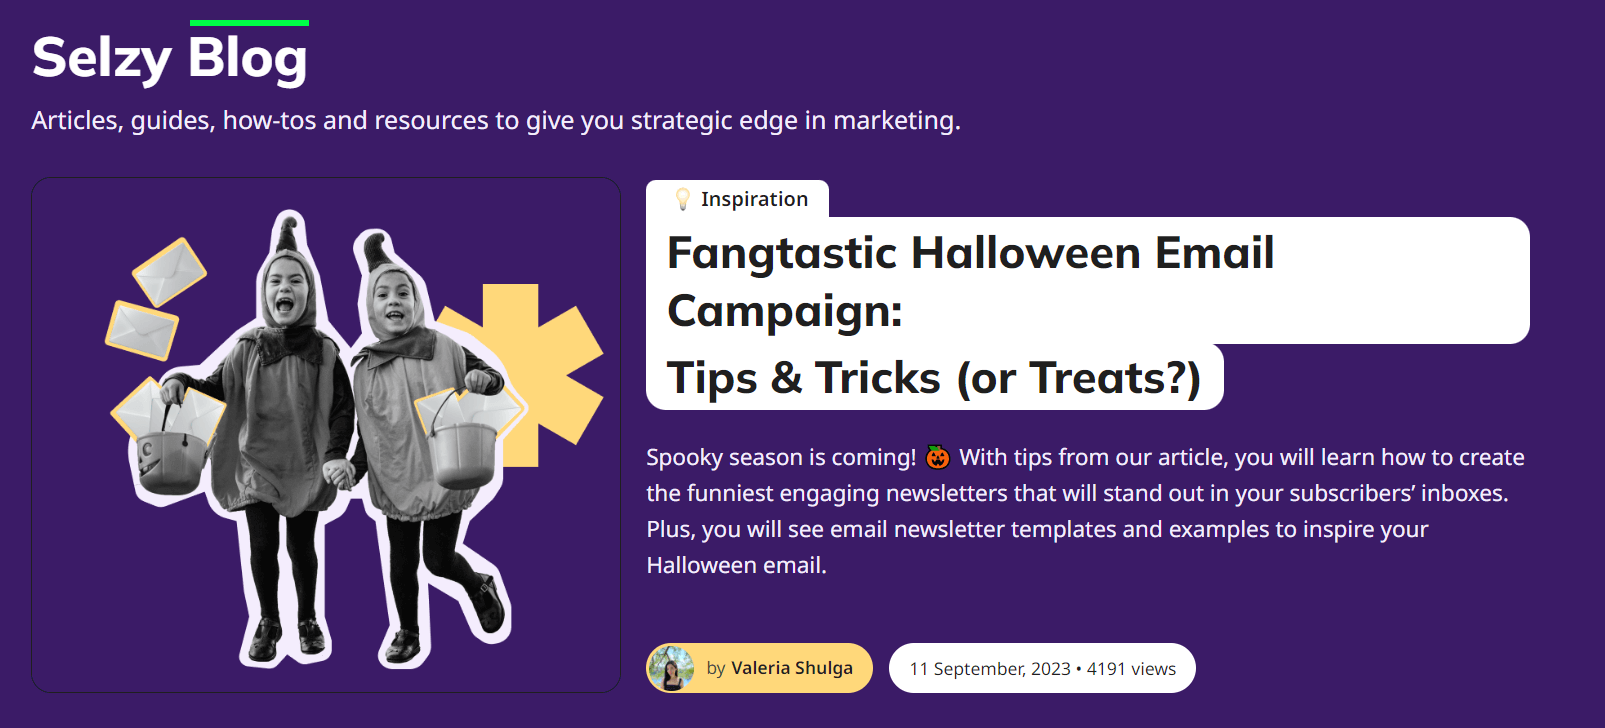 Selzy Blog main page with an article about Halloween email campaign ideas